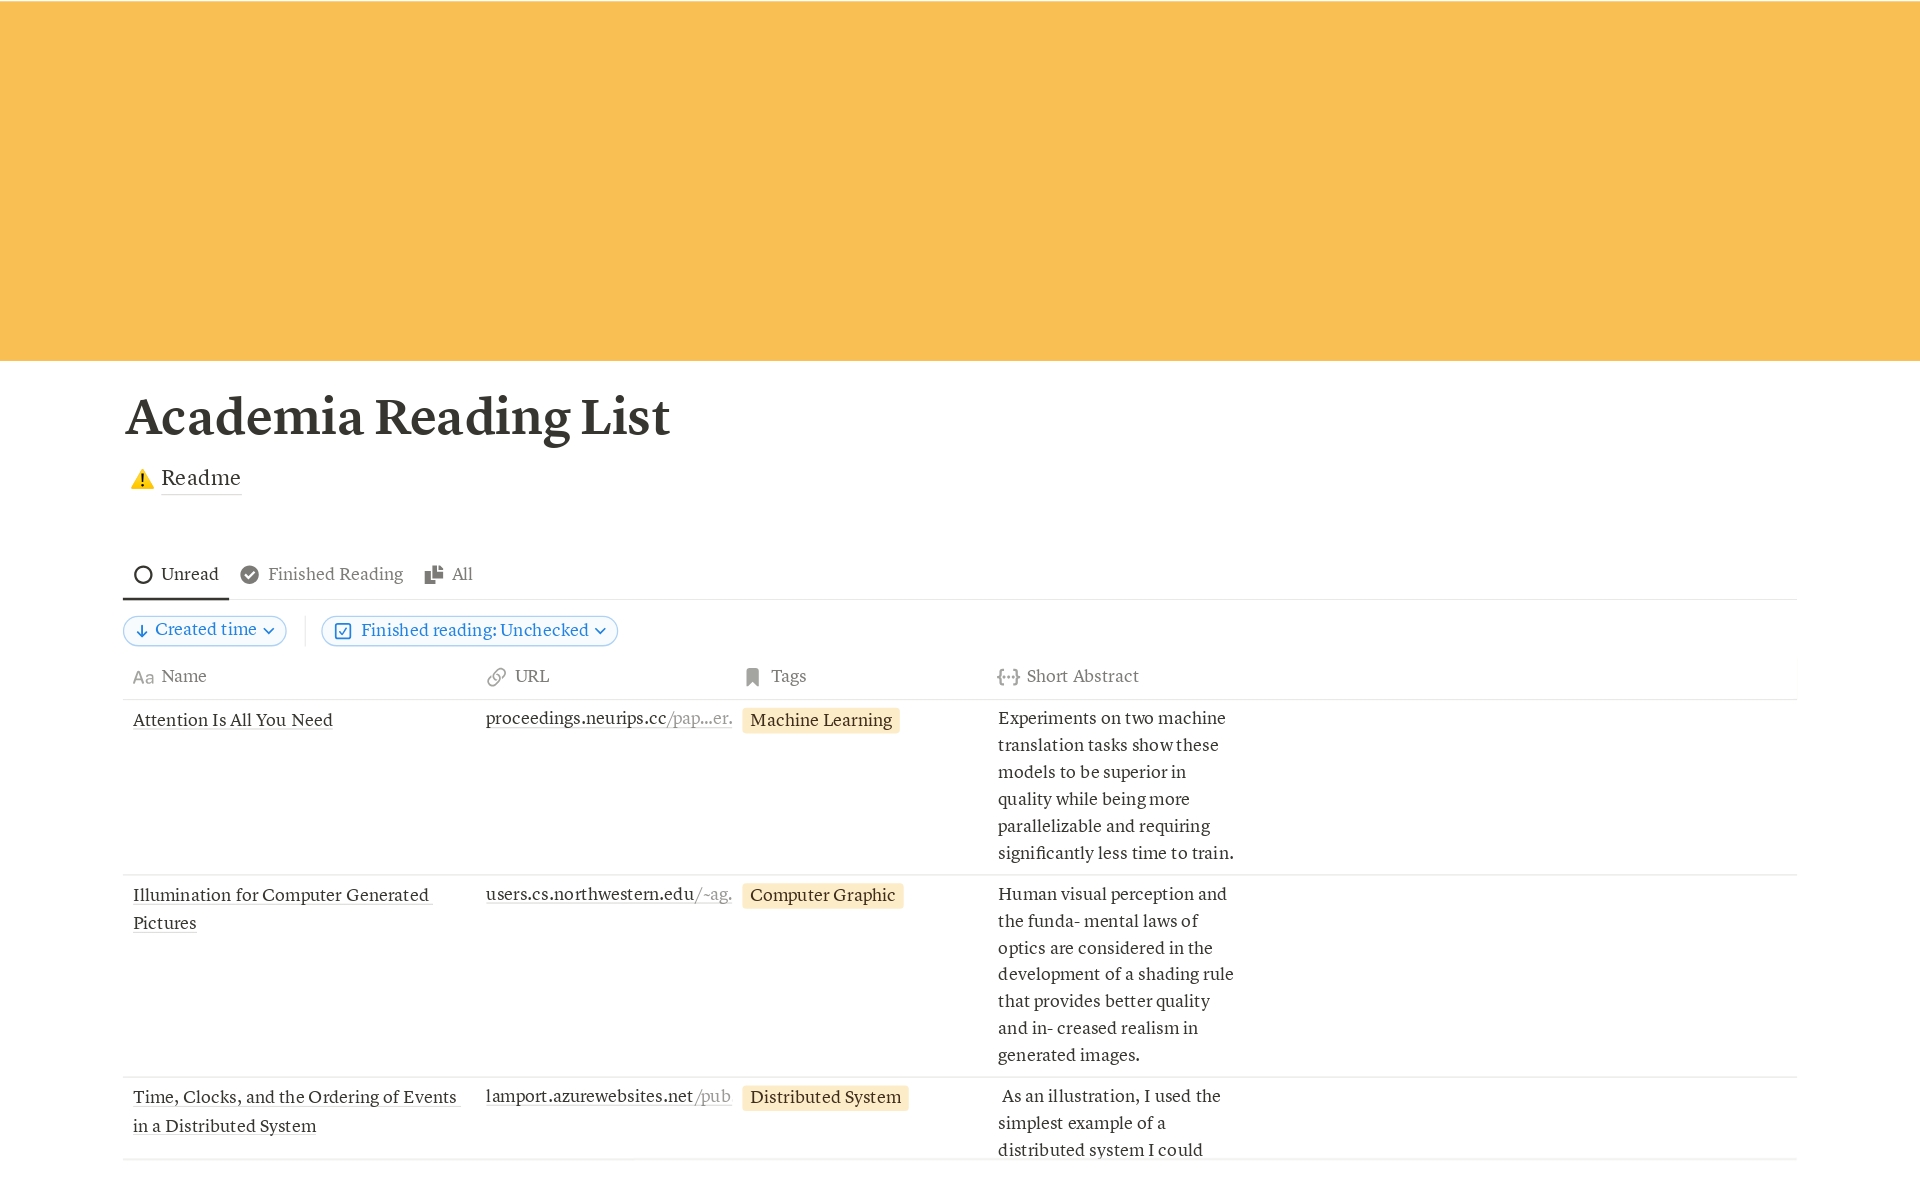 Acaly is a new Notion template to efficiently manage your academic papers. Automatically shorten abstracts for a balanced interface, mark papers as "Finished Reading" to organize your list, and easily toggle between "All" and "Read/Unread" views.